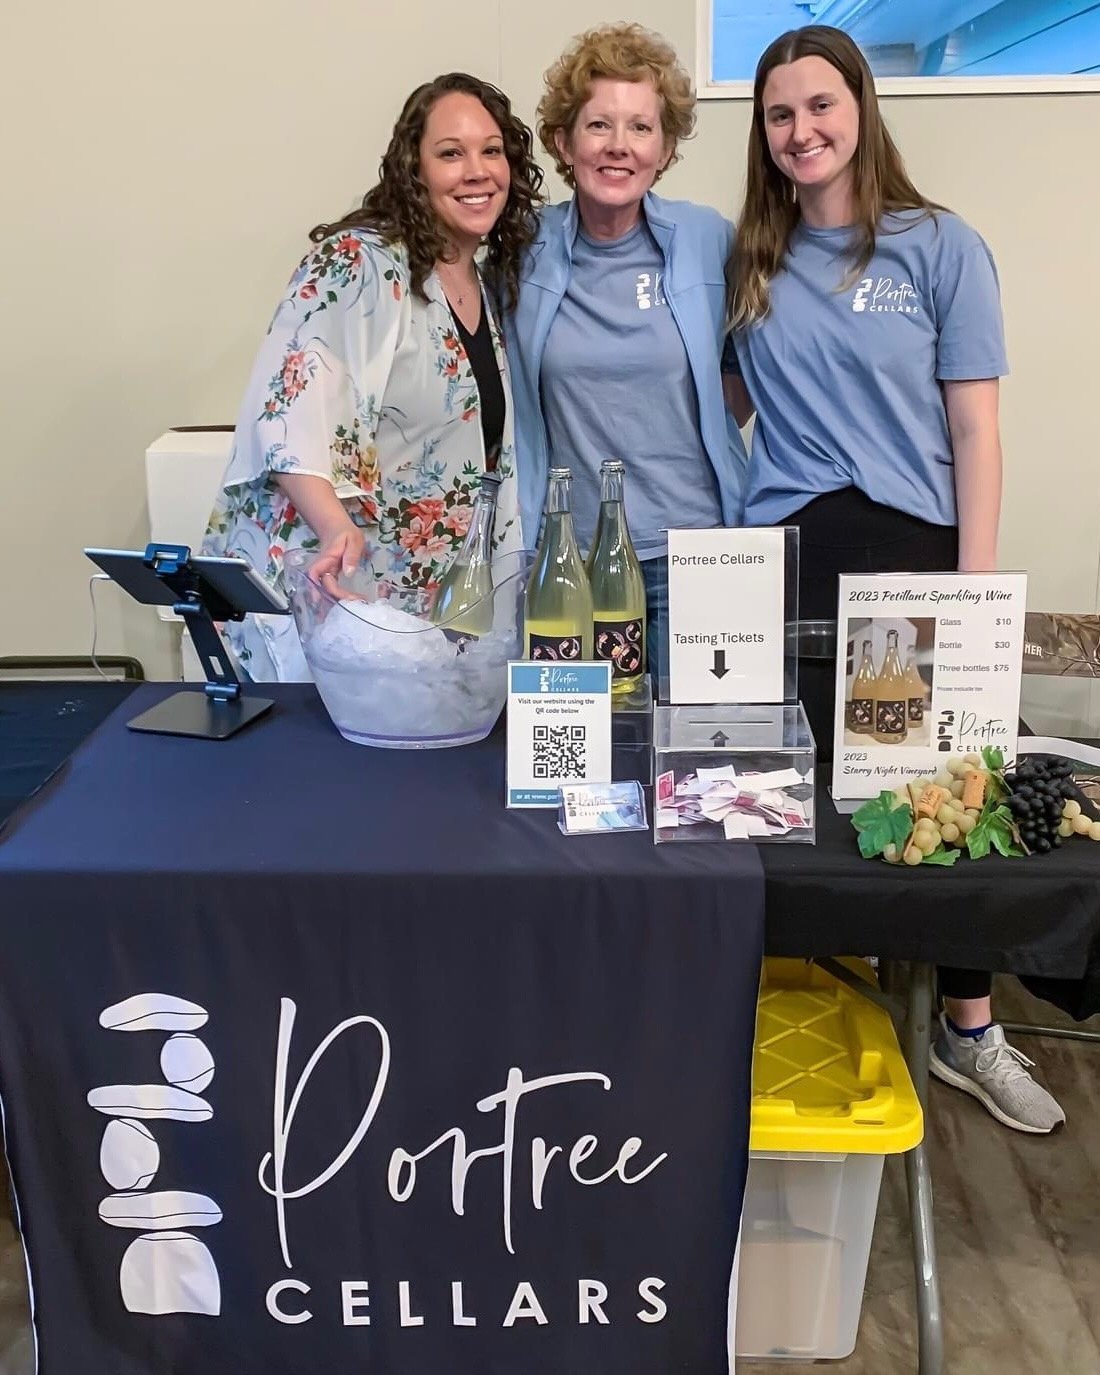 Great fun pouring our sparkling wine at Rootstock this year!  Thank you to the organizers and all that came out for the event.  If you missed it, head to our tasting room in Hye and pick up a bottle to celebrate your day!

 #rootstockwinefestival #po